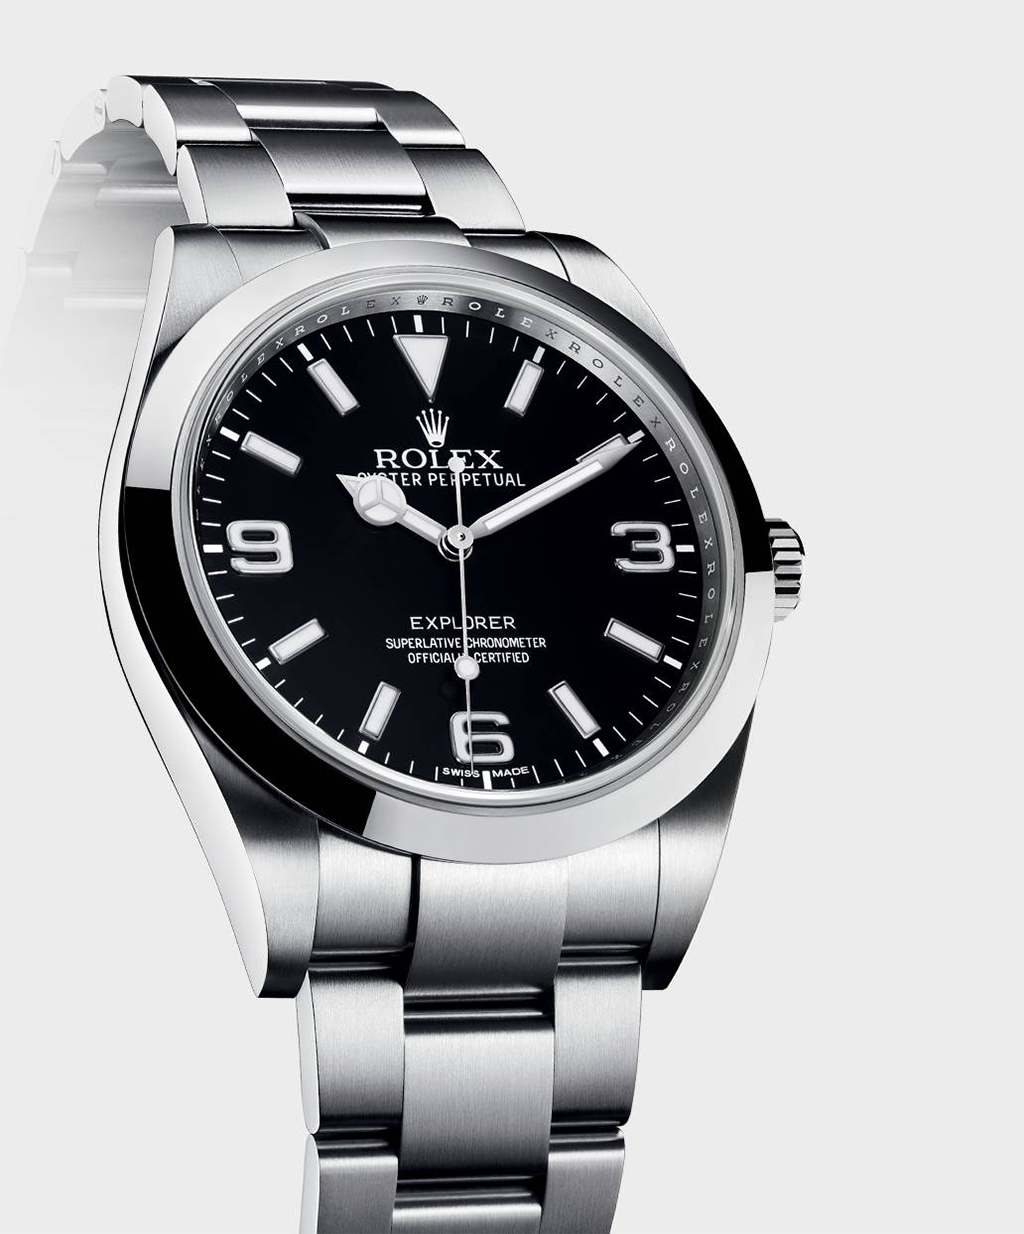 A Rolex promotional shot of the new Explorer.